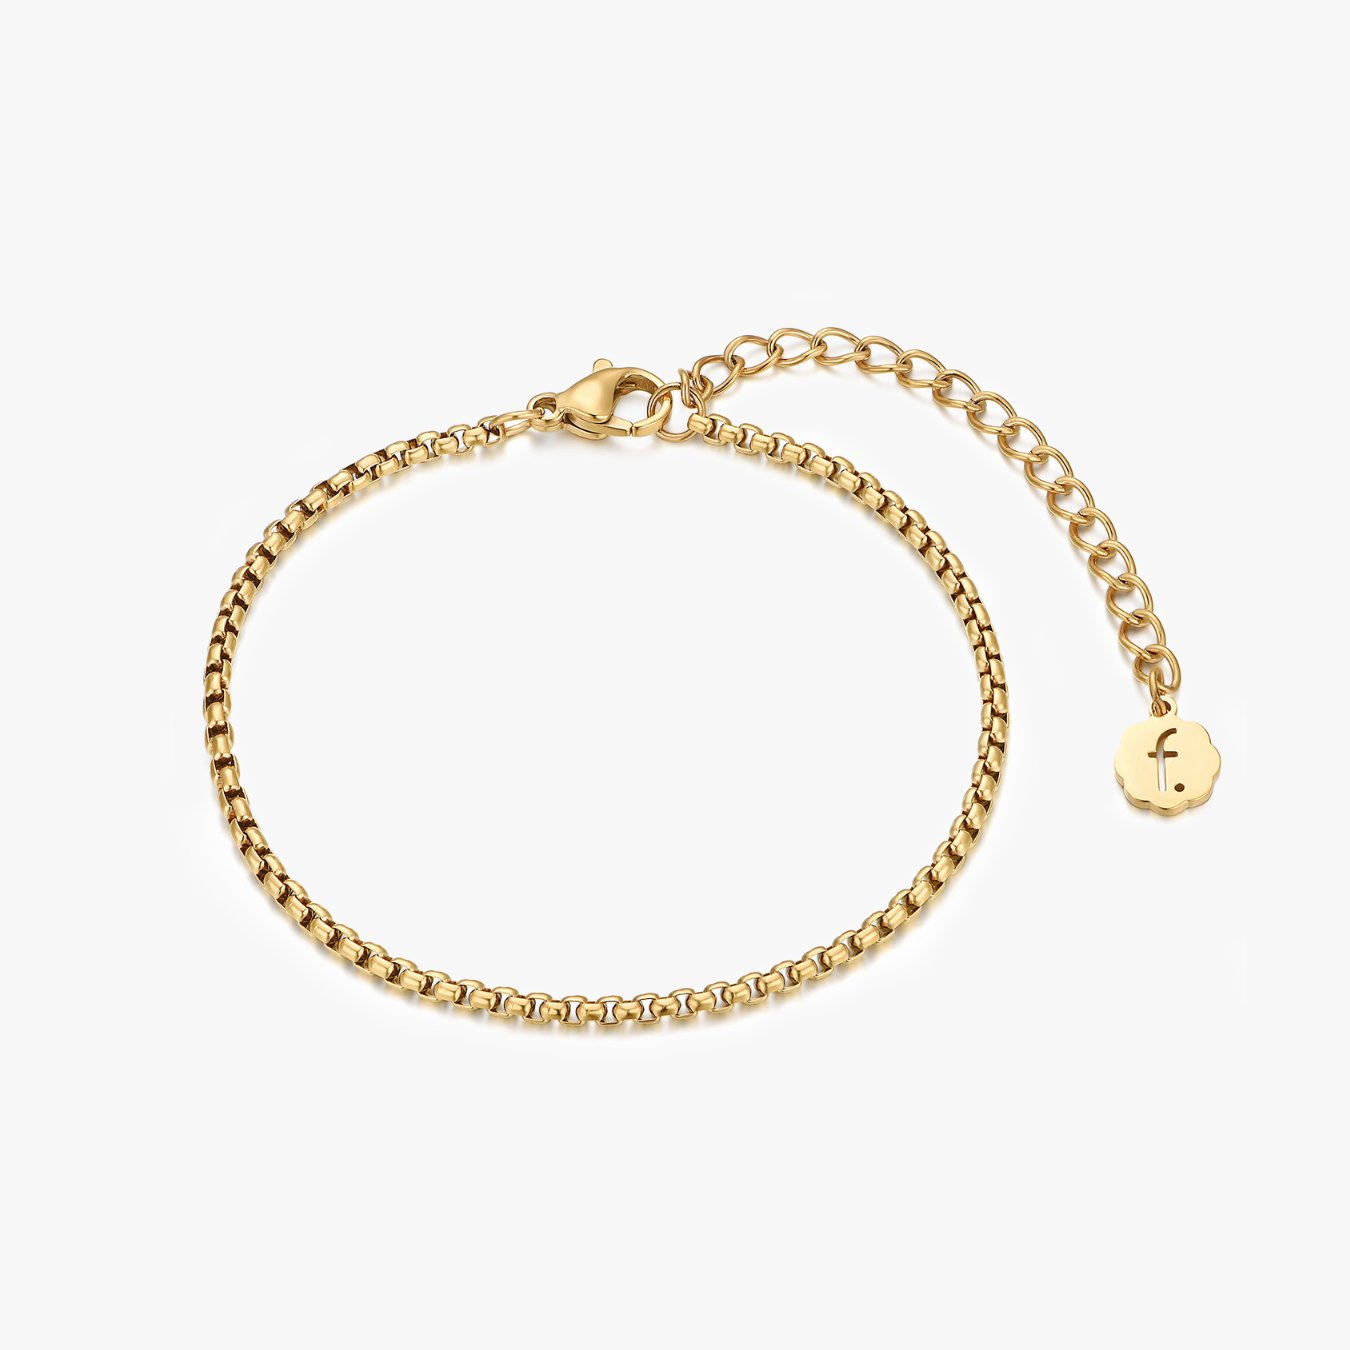 Round Box Chain Bracelet in Gold - Flaire & Co.